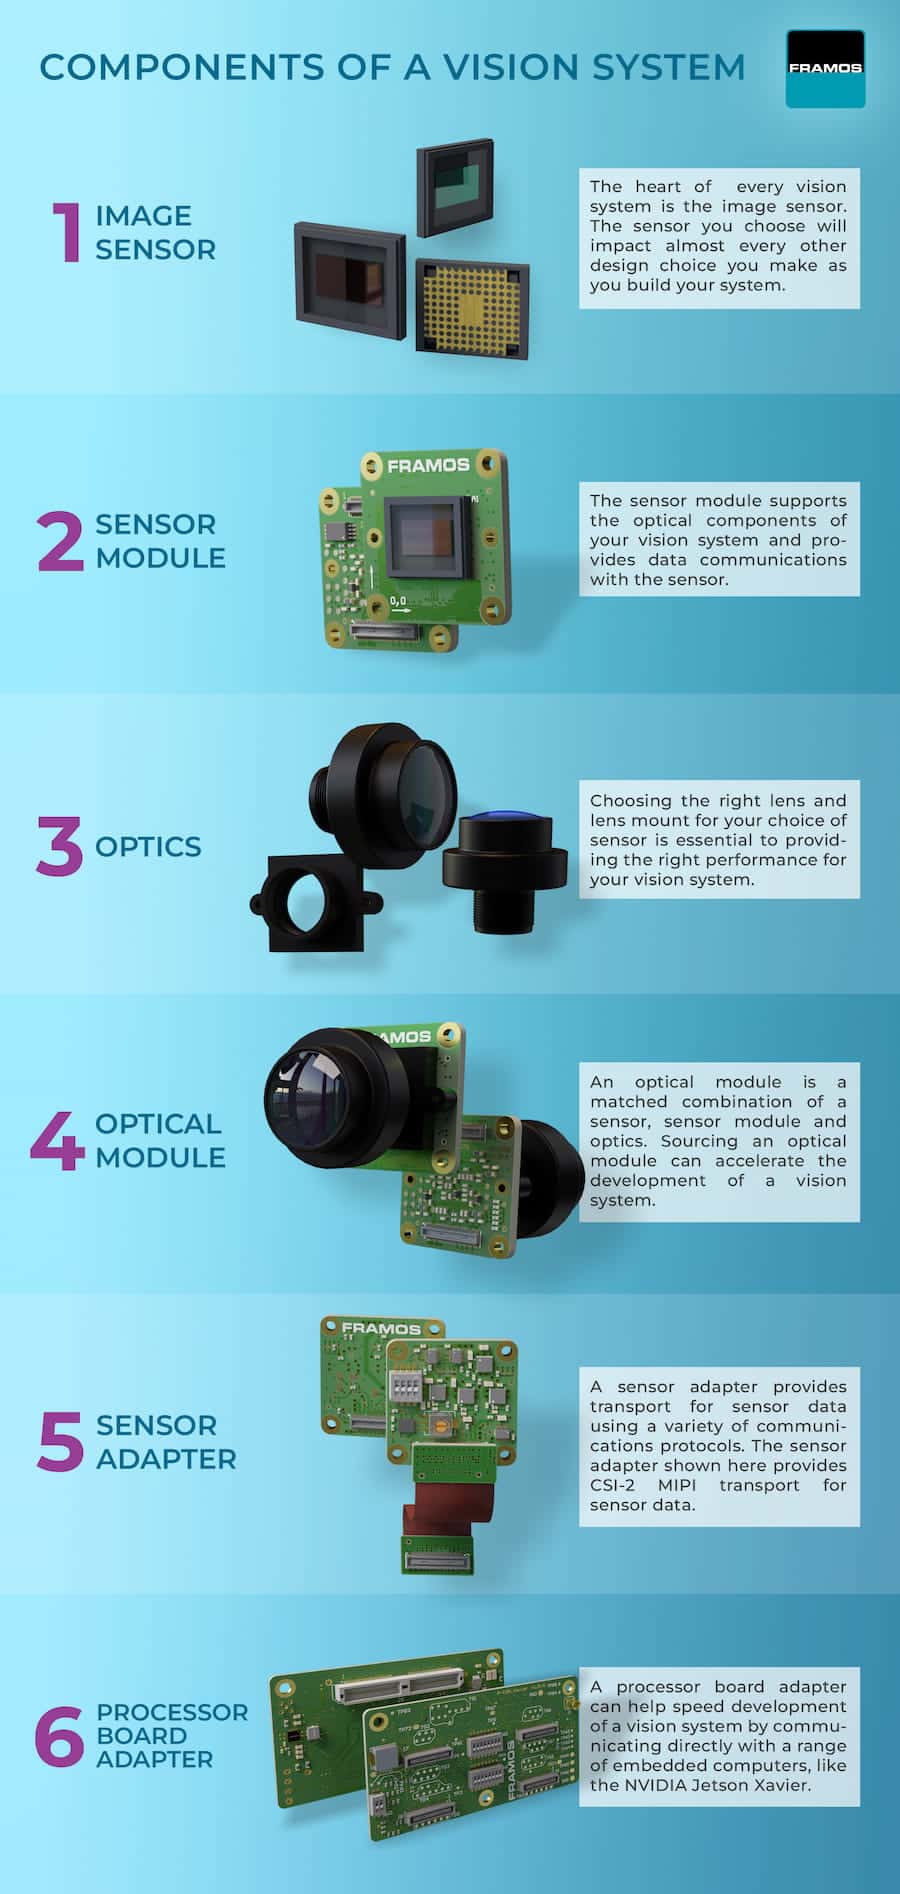 components of a vision system FRAMOS mobile view